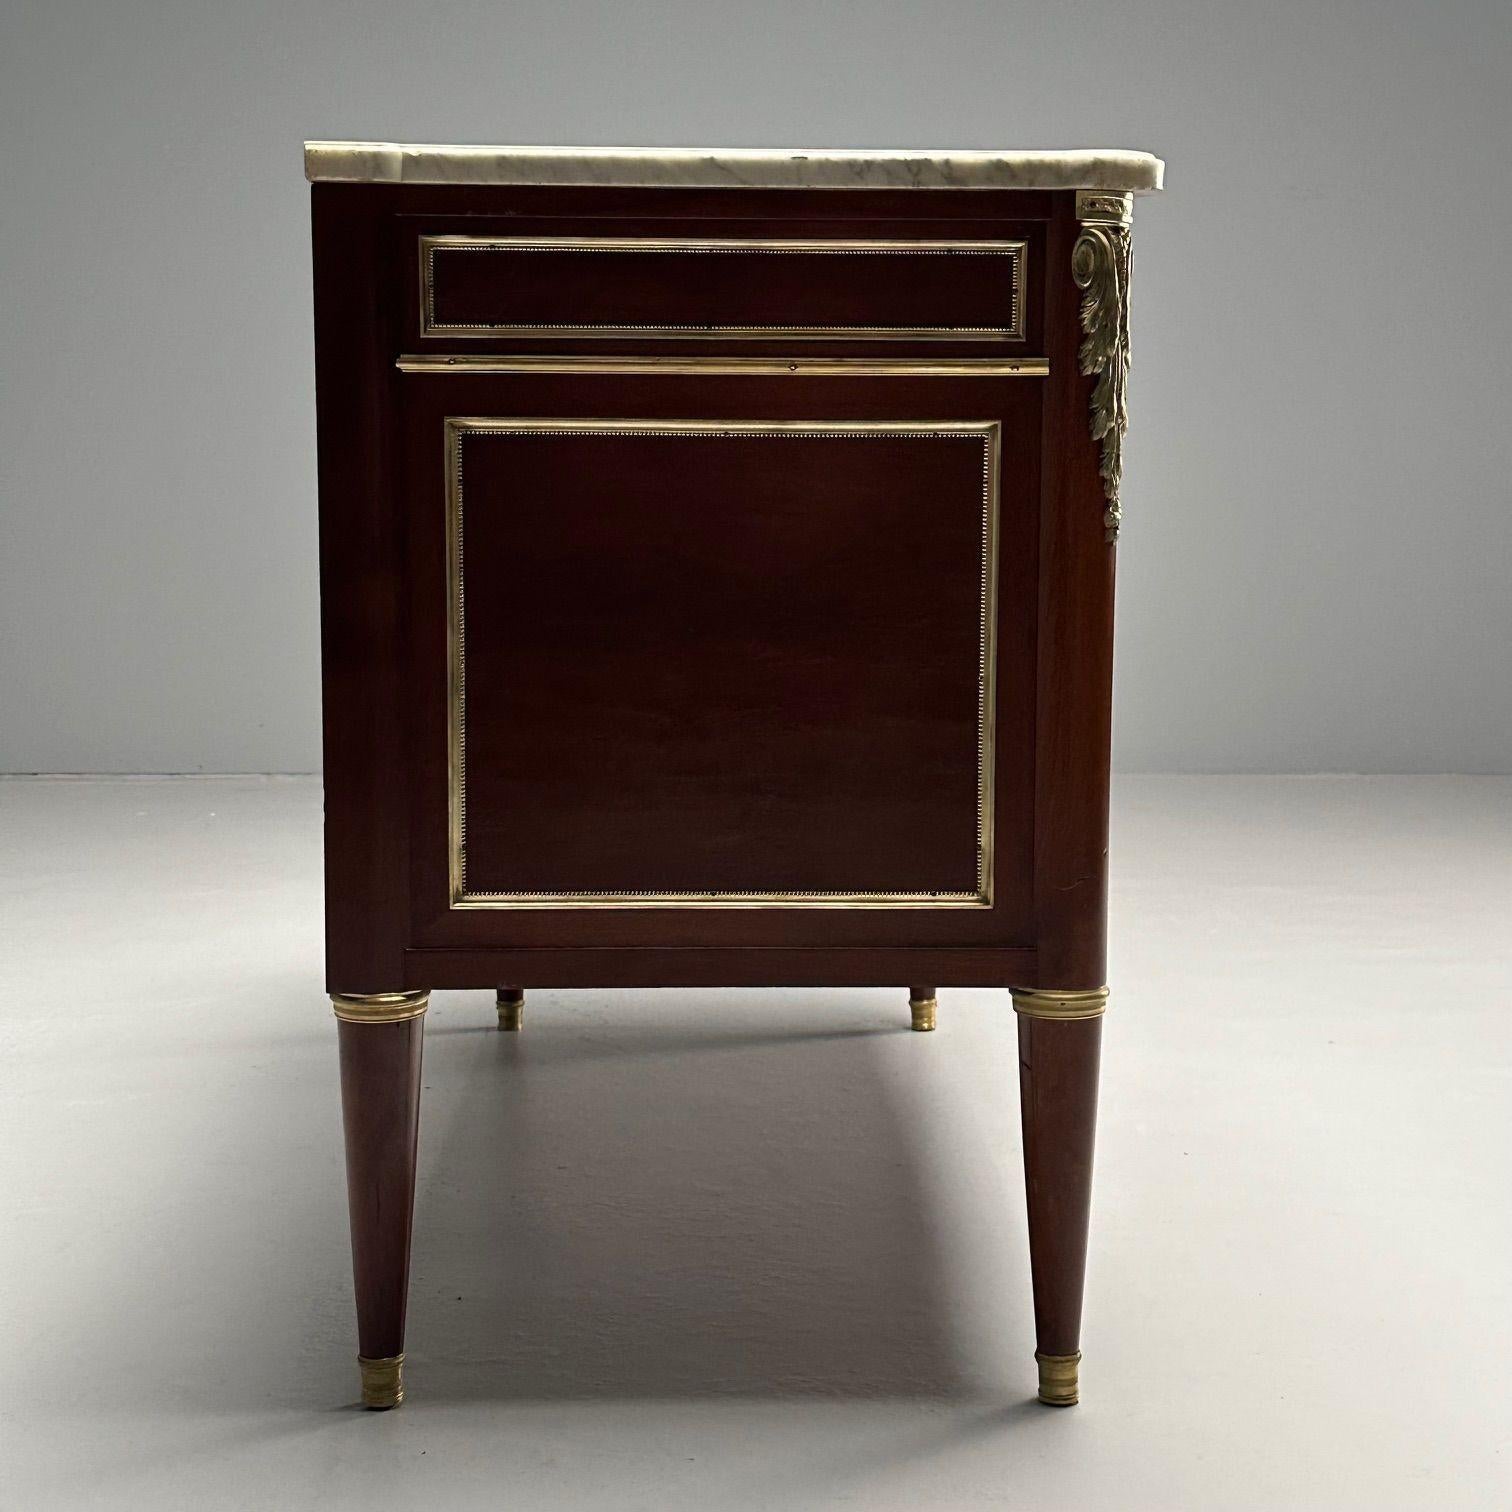 Hollywood Regency, French Louis XVI Style Commode, Mahogany, Oak, Marble, 1920s For Sale 3